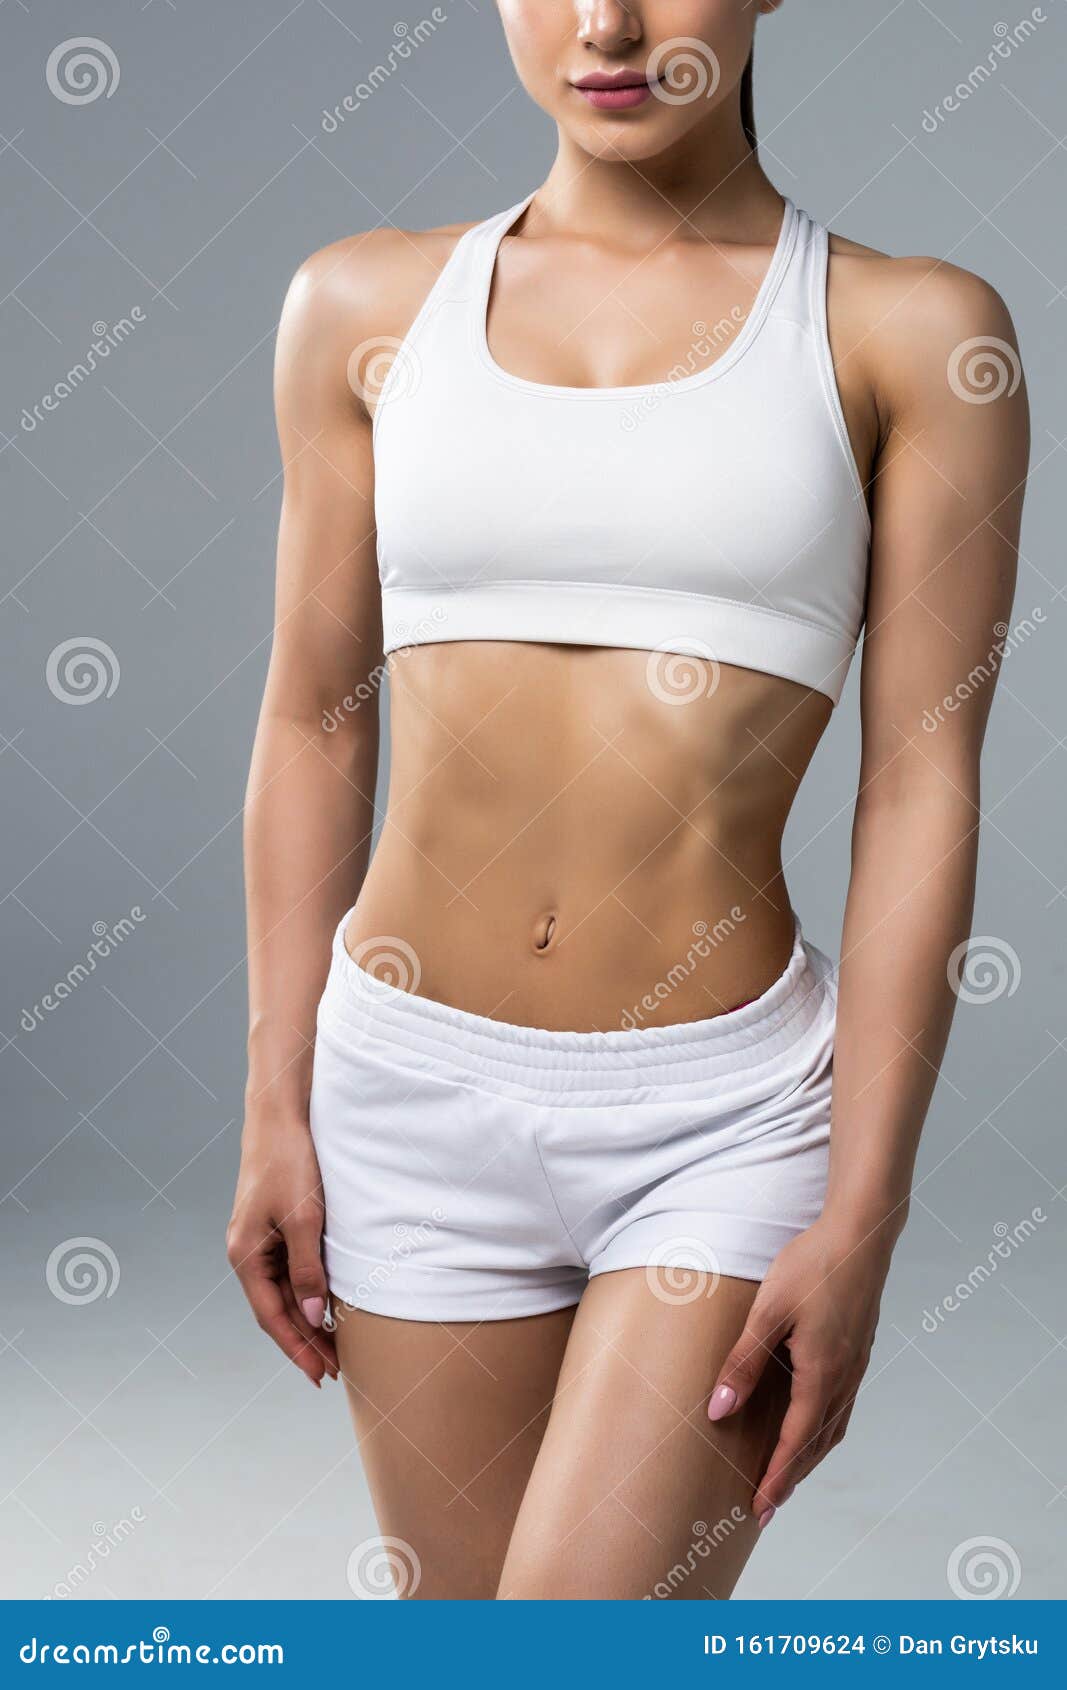 https://thumbs.dreamstime.com/z/slim-waist-young-sporty-woman-detail-perfect-fit-female-body-slim-waist-young-sporty-woman-detail-perfect-fit-female-161709624.jpg